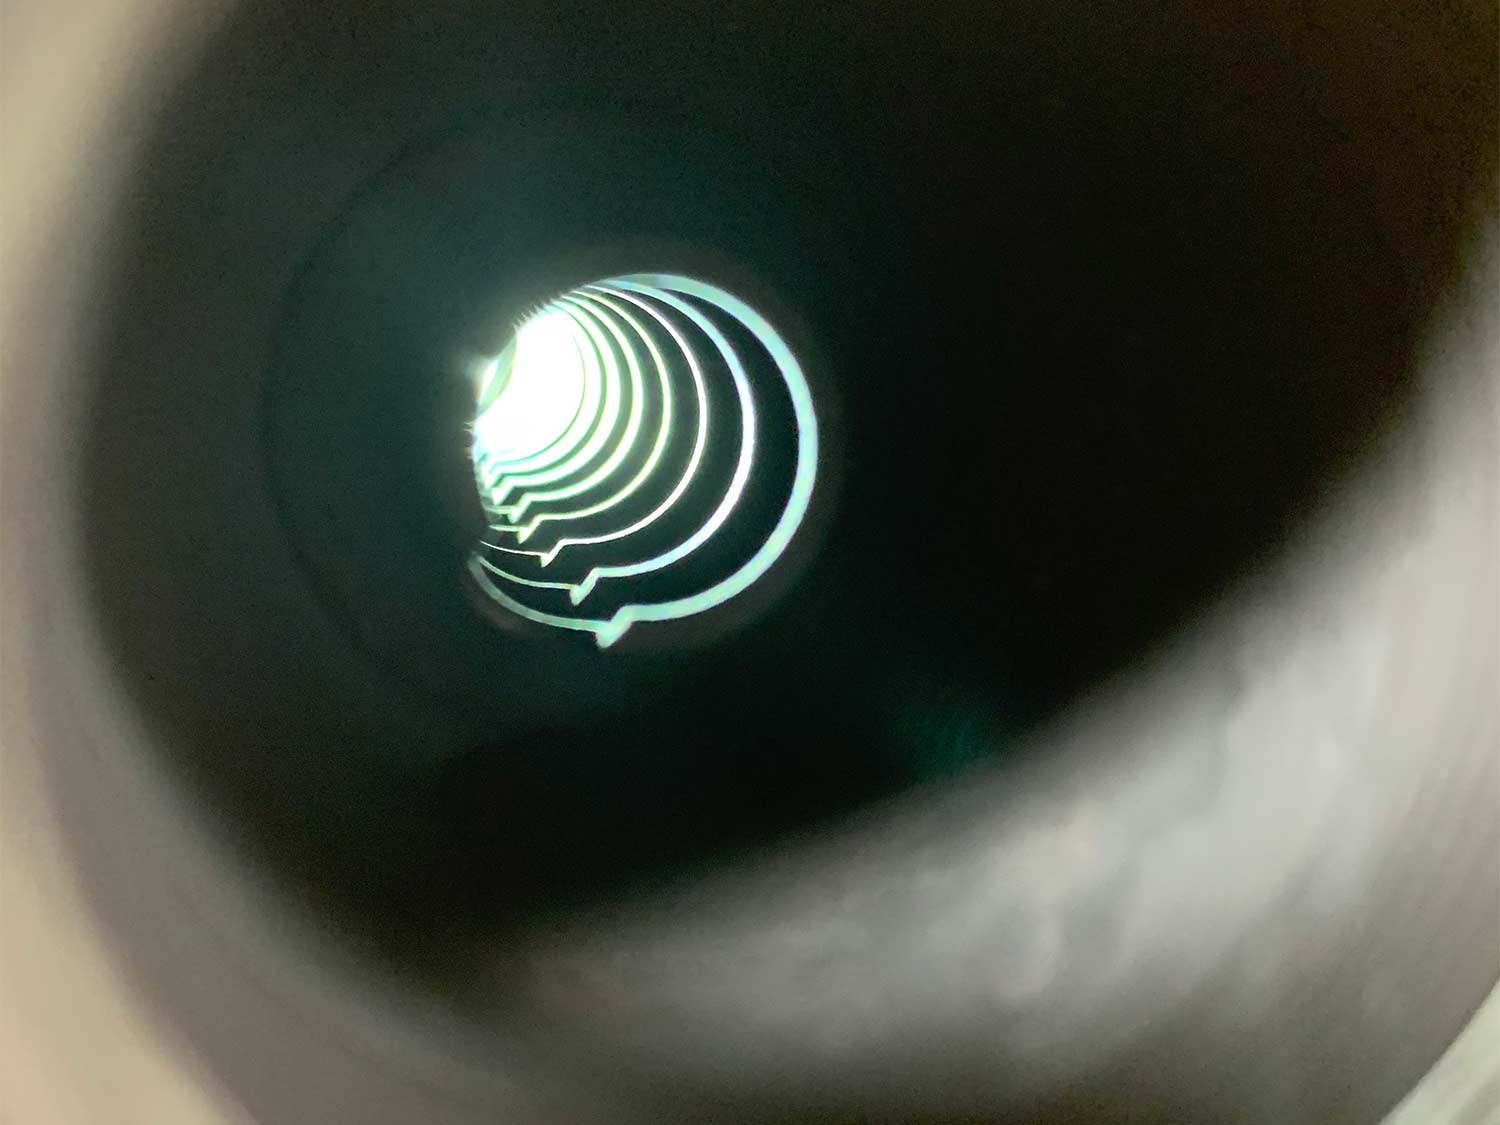 A look down the inside a suppressor, showing baffles and chambers.